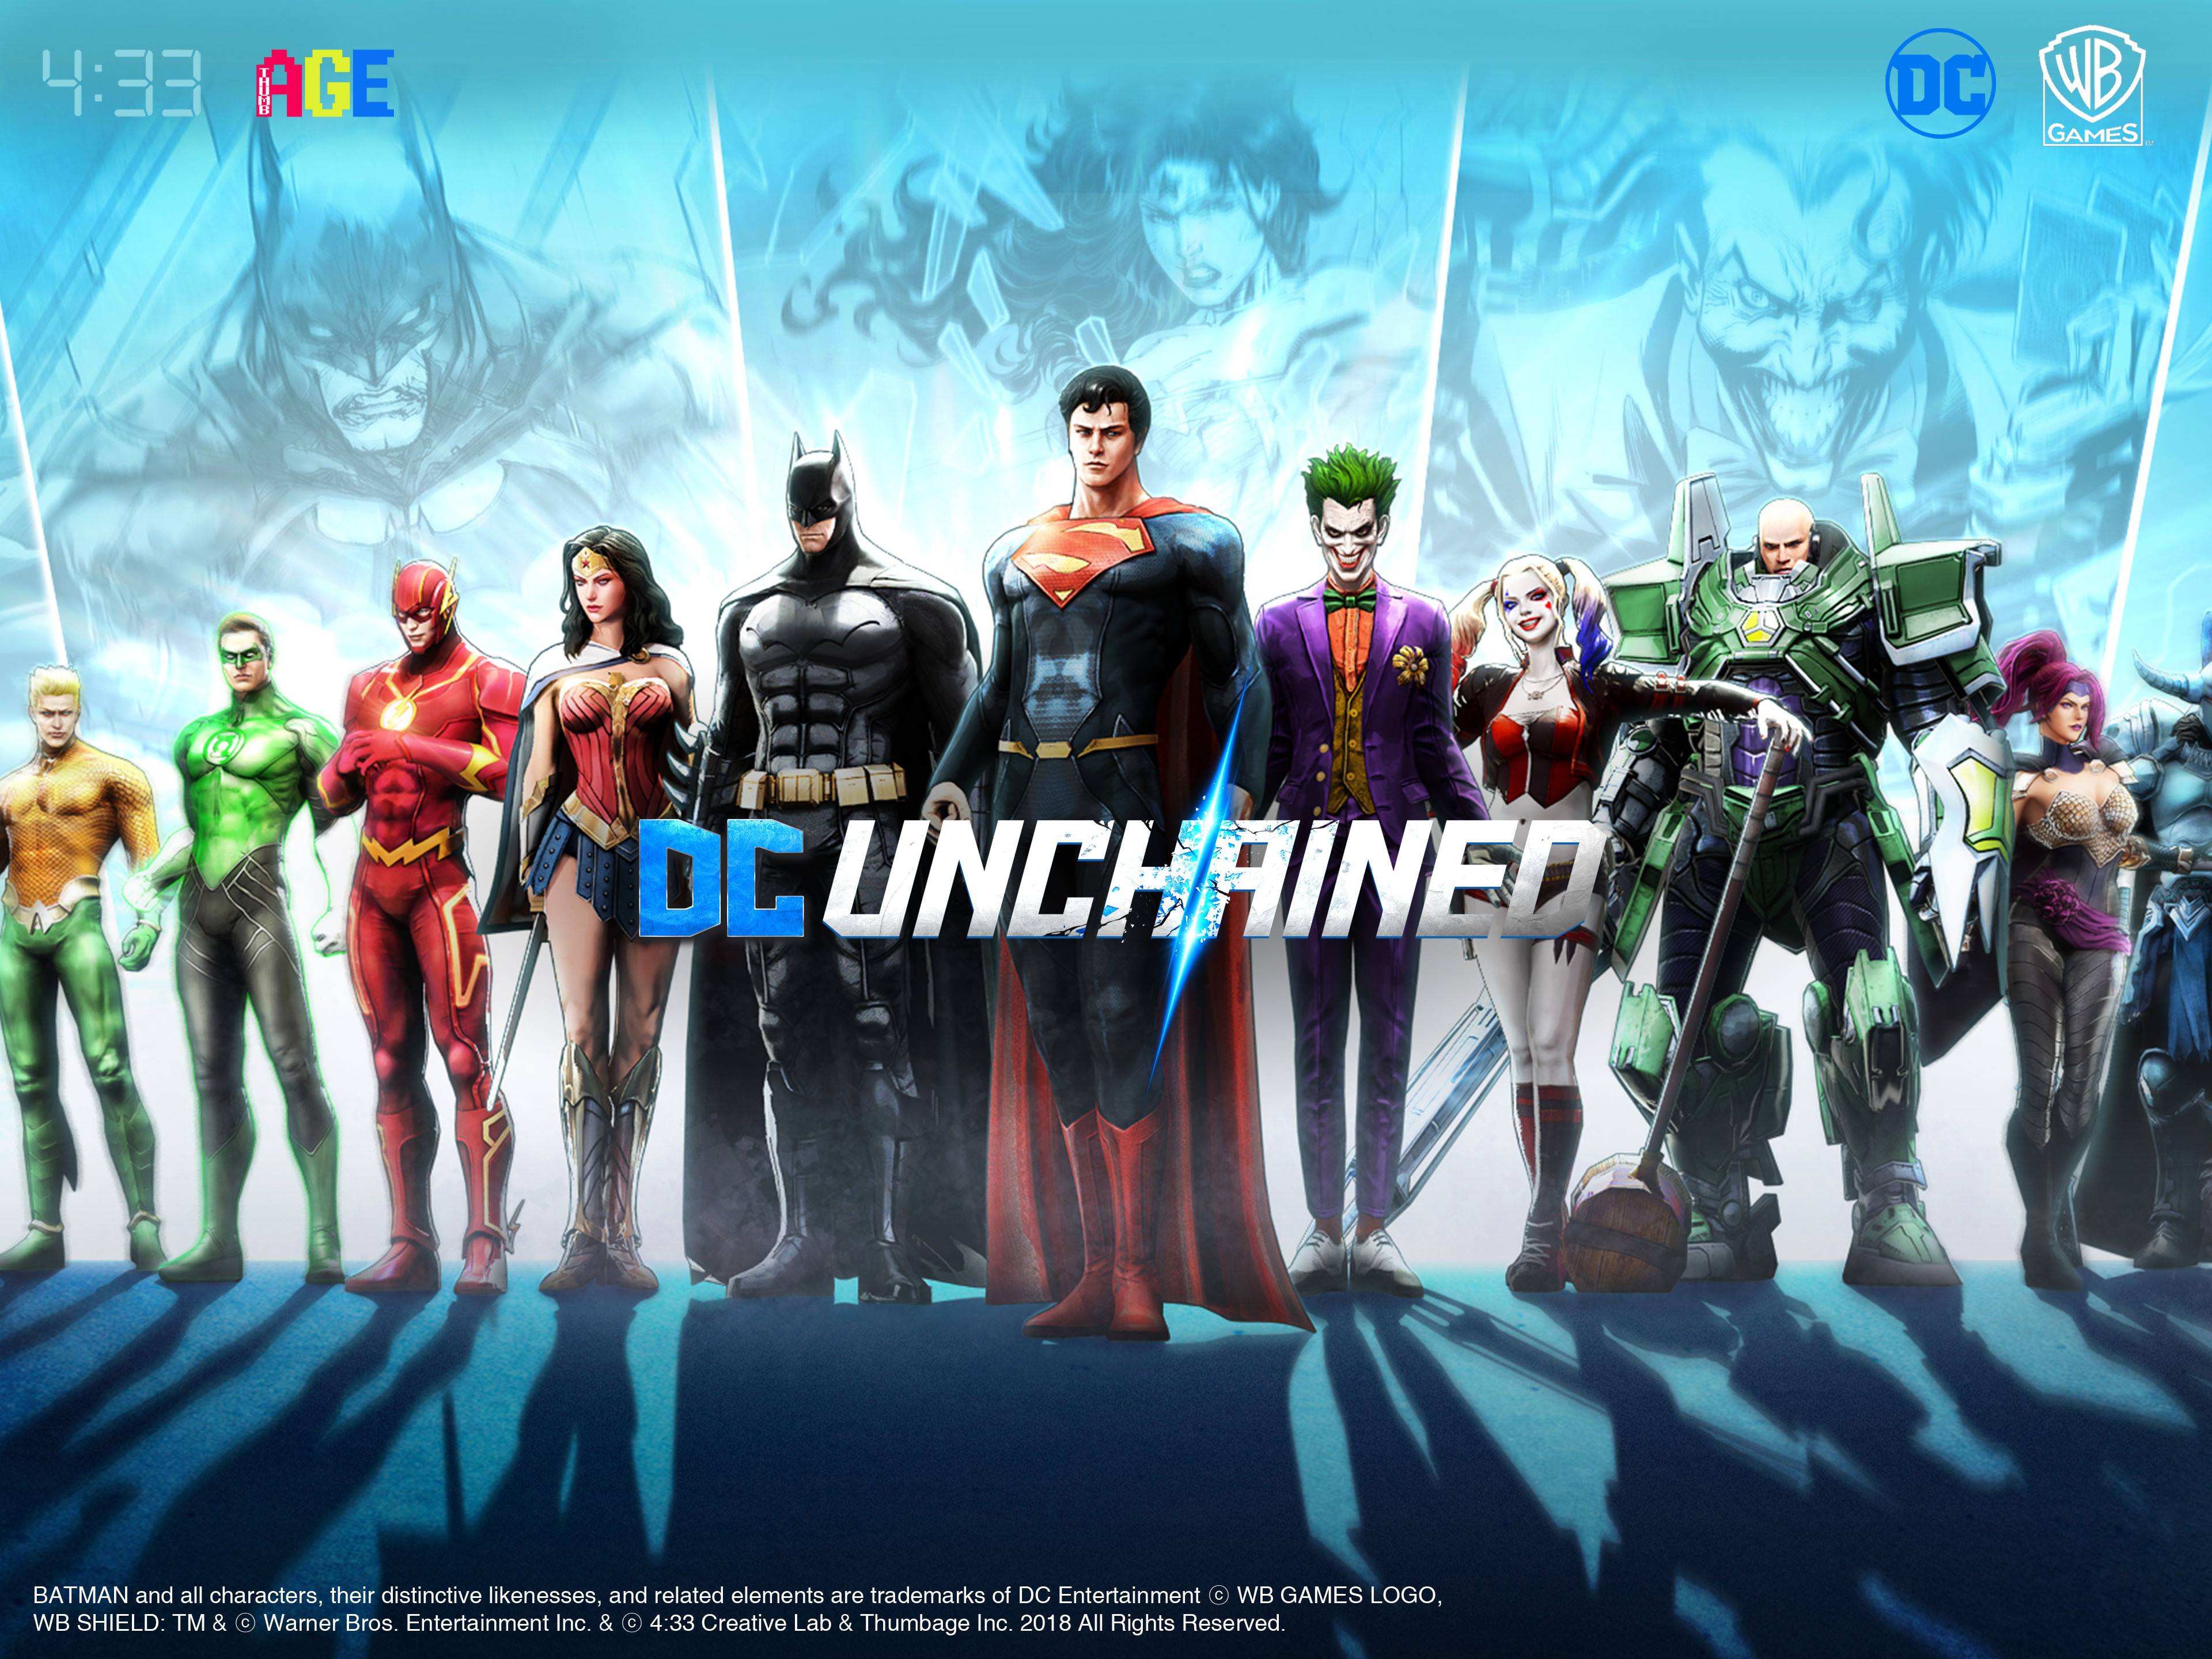 Mobile RPG, DC Unchained preregistration phase begins today